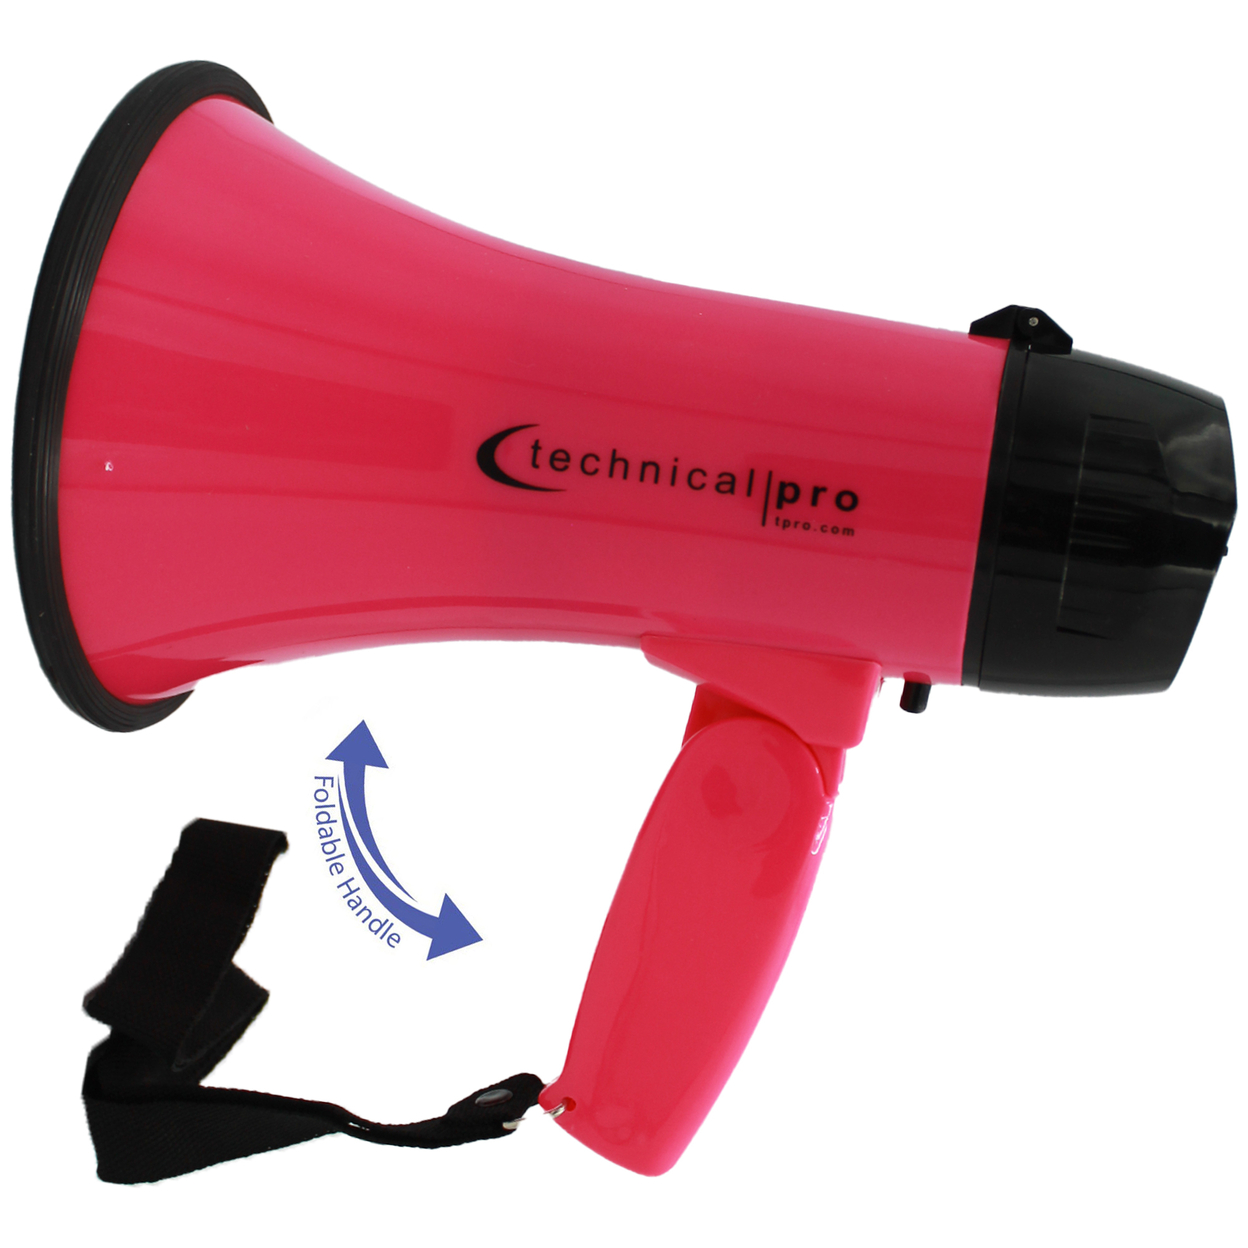 Technical Pro Lightweight Portable 20 Watts Pink And Black 300M Range Megaphone Bullhorn With Strap, Siren, And Volume Control